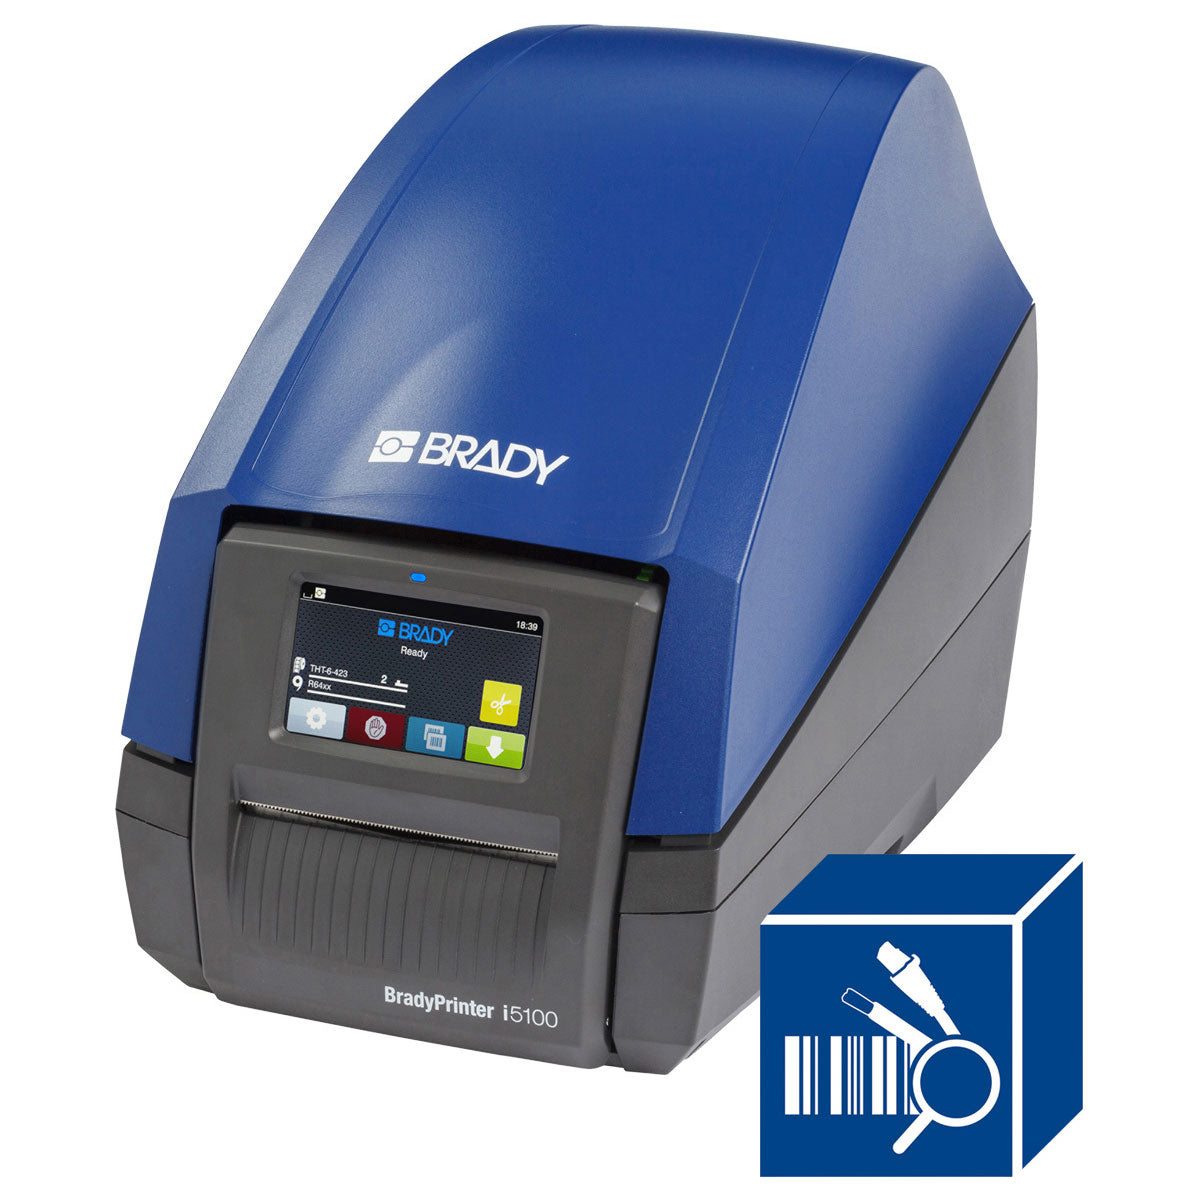 BradyPrinter i5100 300dpi Industrial Label Printer with Product and Wire ID Software Suite